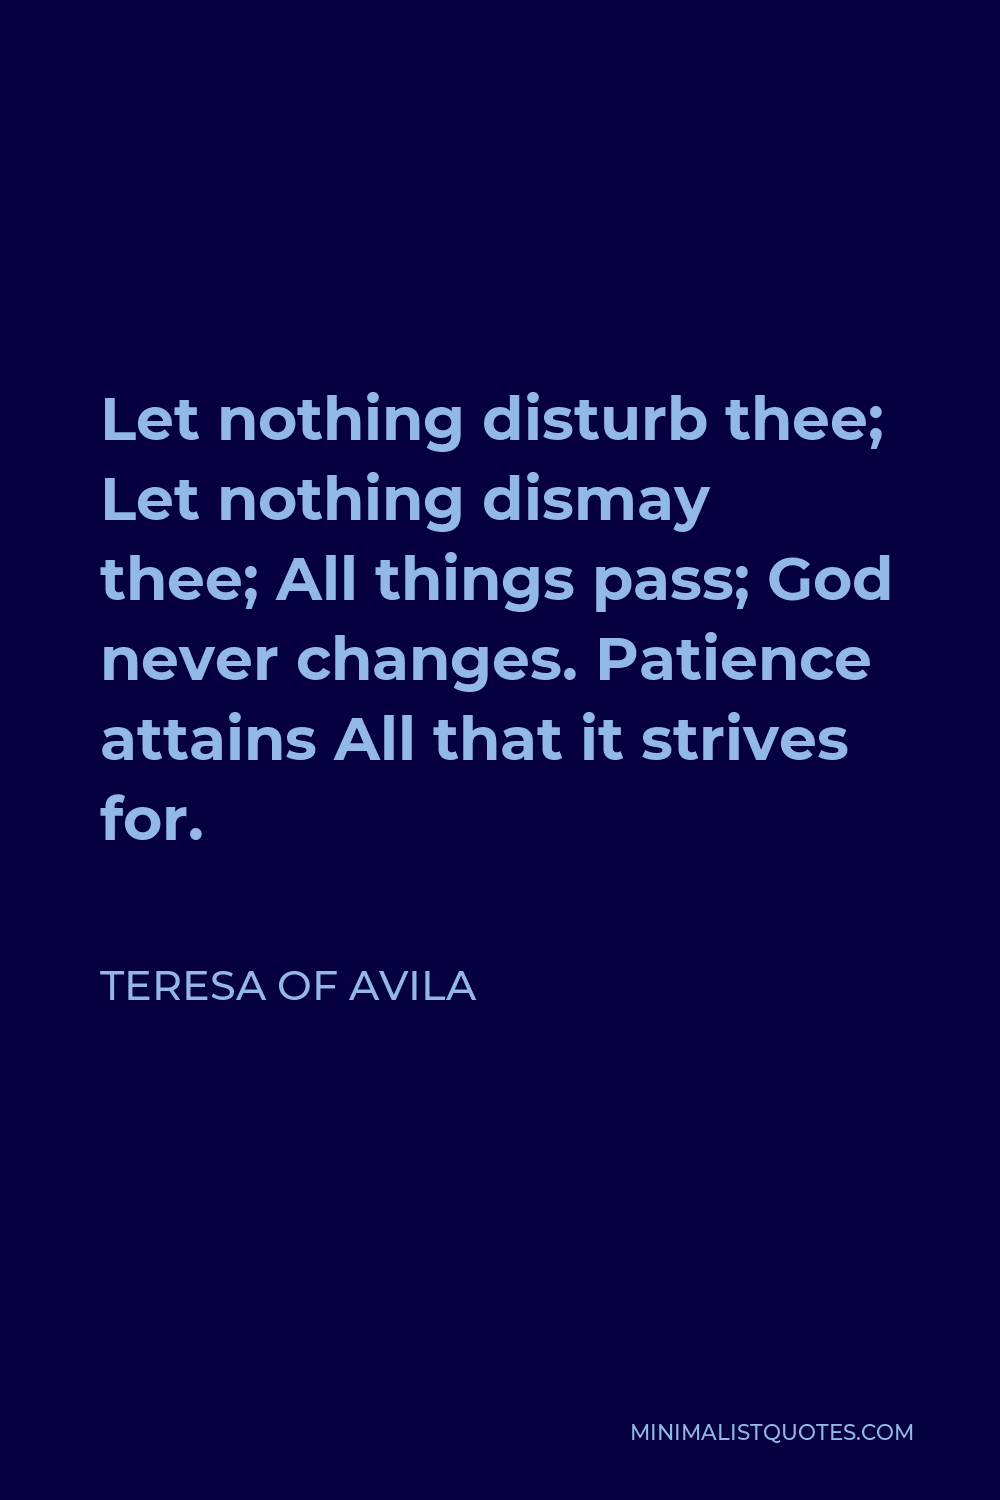 Teresa of Avila Quote - Let nothing disturb thee; Let nothing dismay thee; All things pass; God never changes. Patience attains All that it strives for.